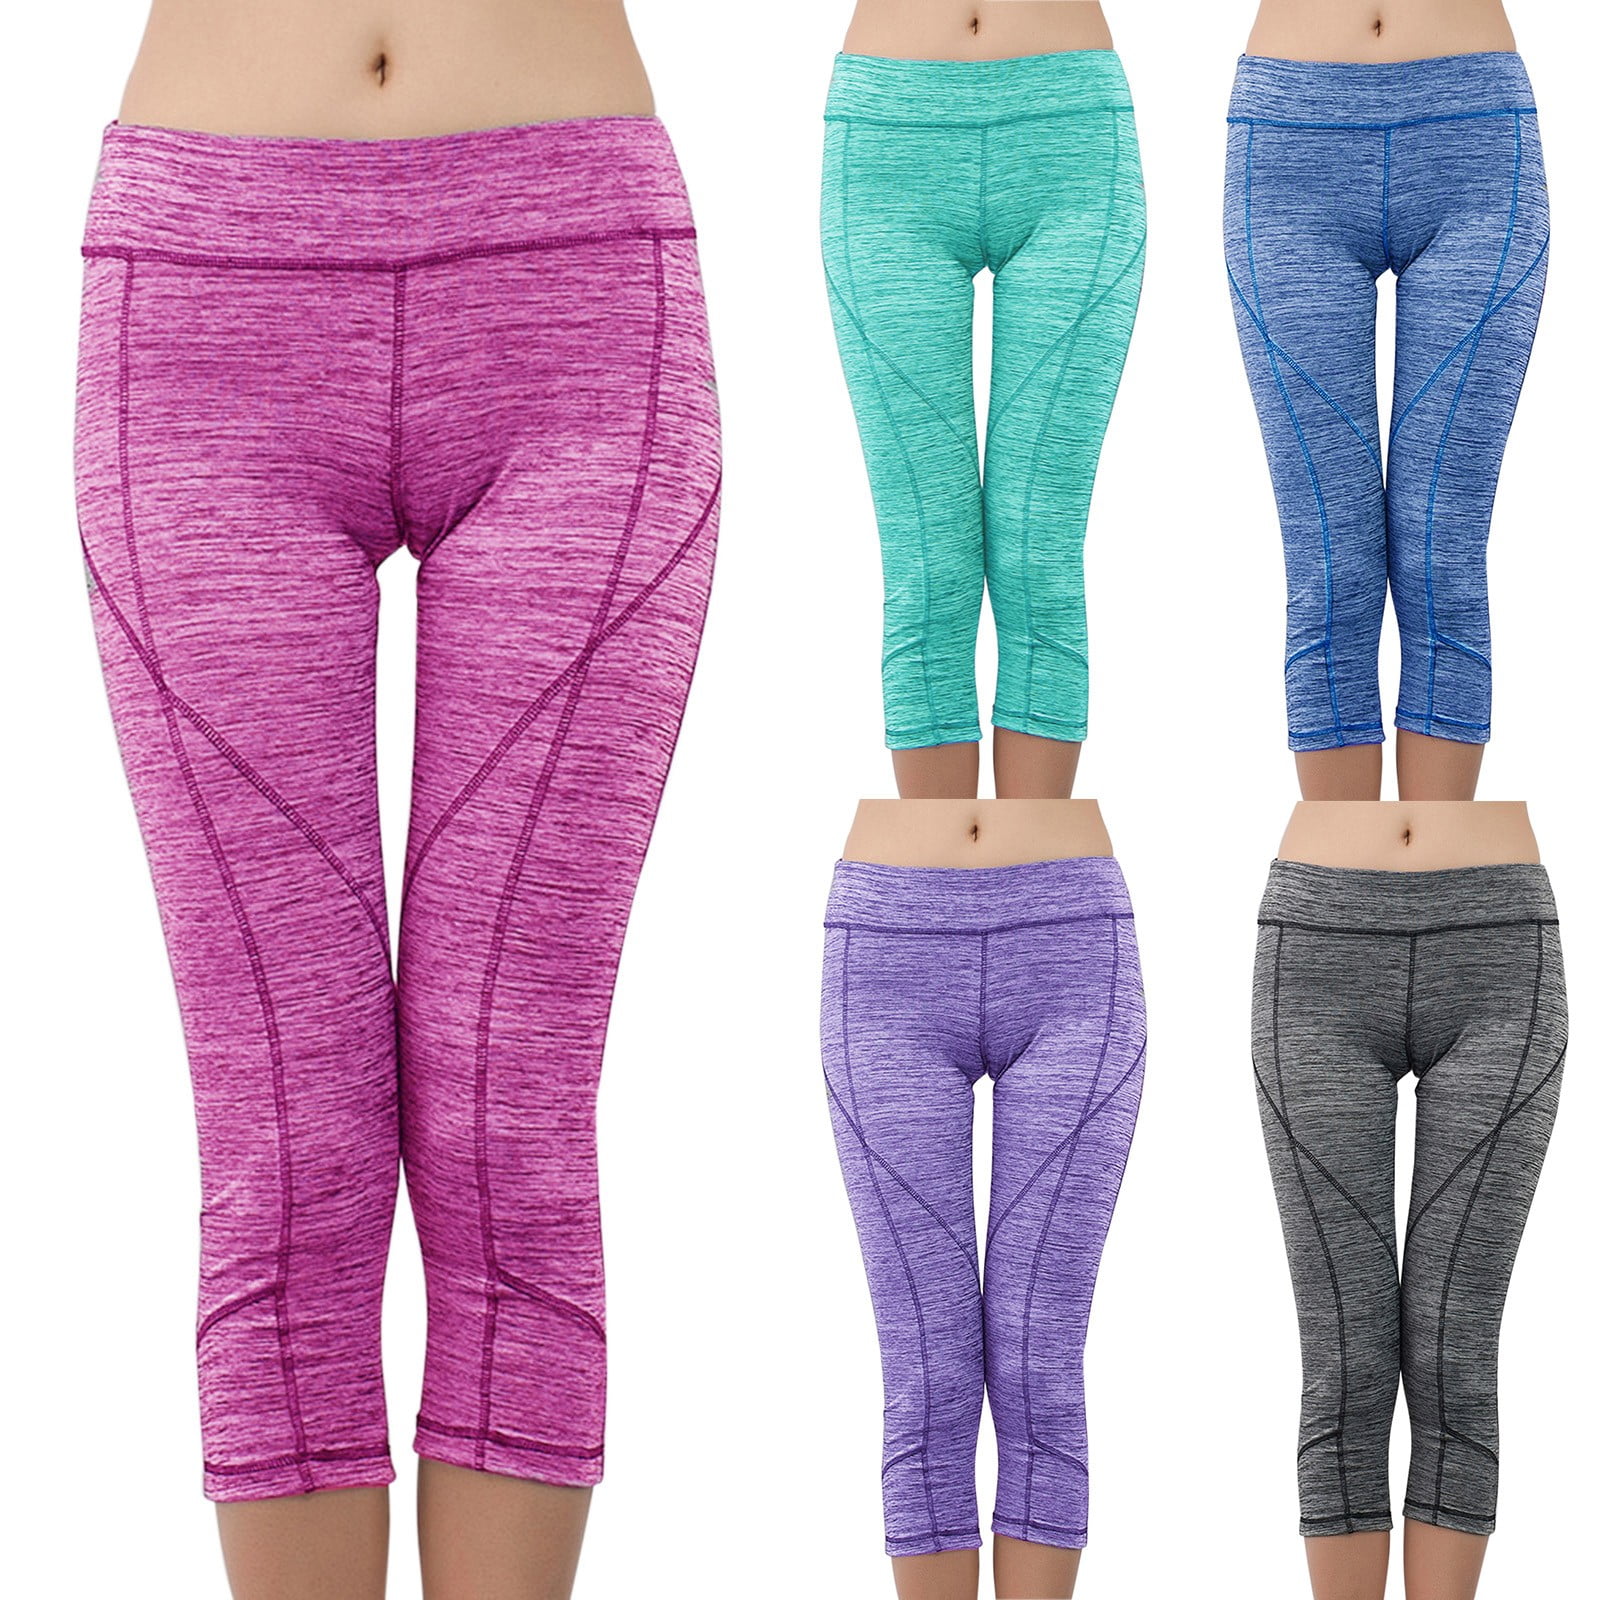 Cathalem Yoga Pants with Pockets for Women plus Size Petite